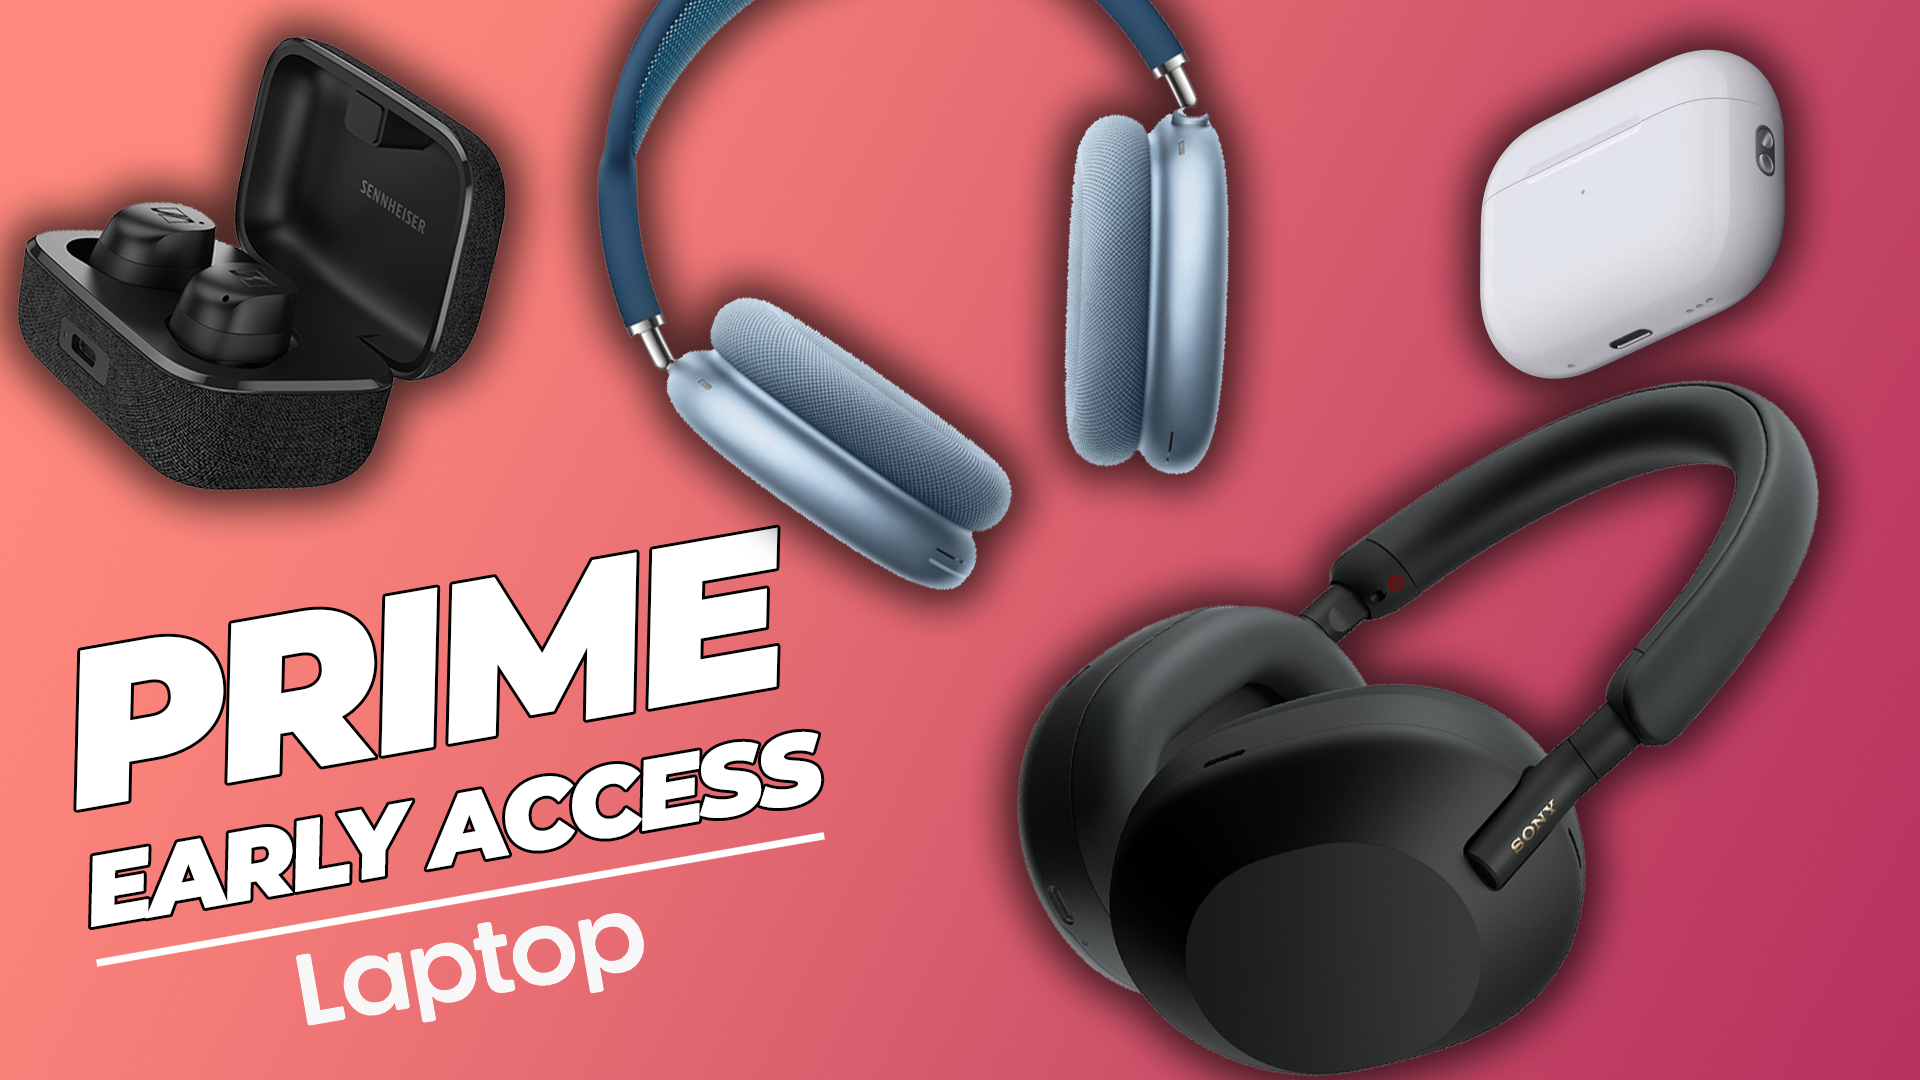 Amazon Prime Early Access headphone deals — Best savings in the early Black Friday sale